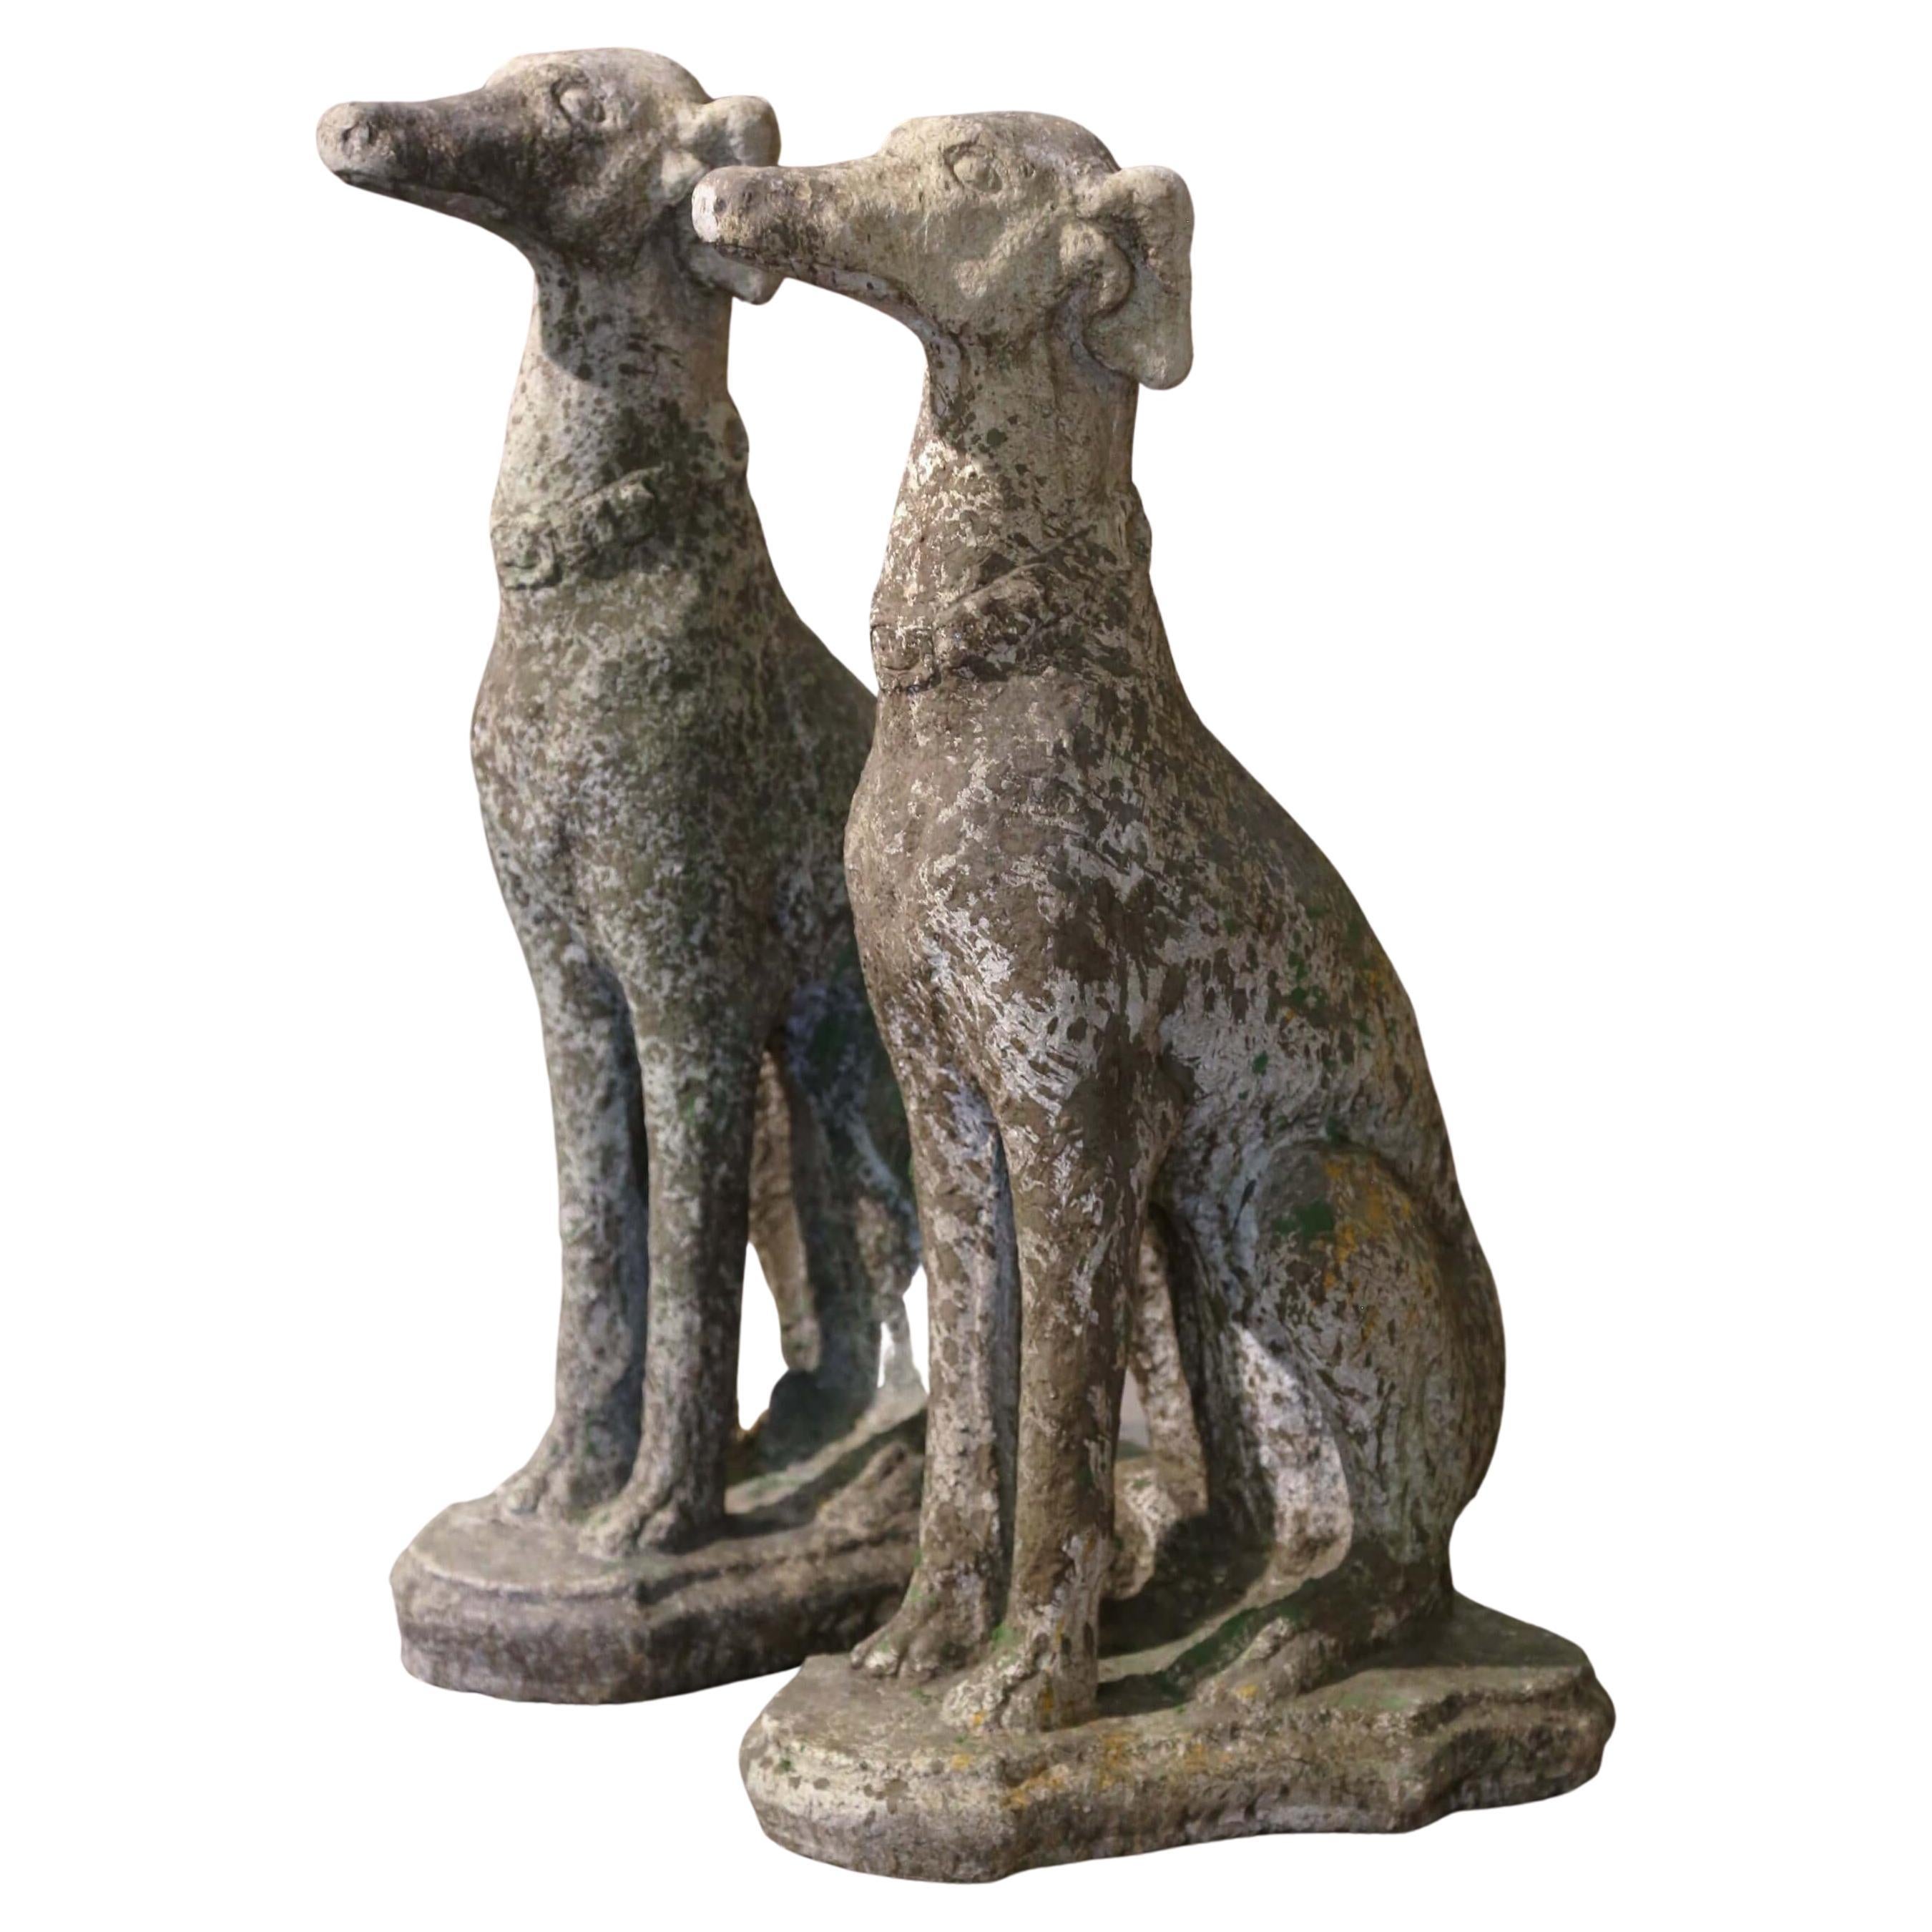 Pair of Vintage French Outdoor Weathered Carved Stone Greyhound Dog Sculptures